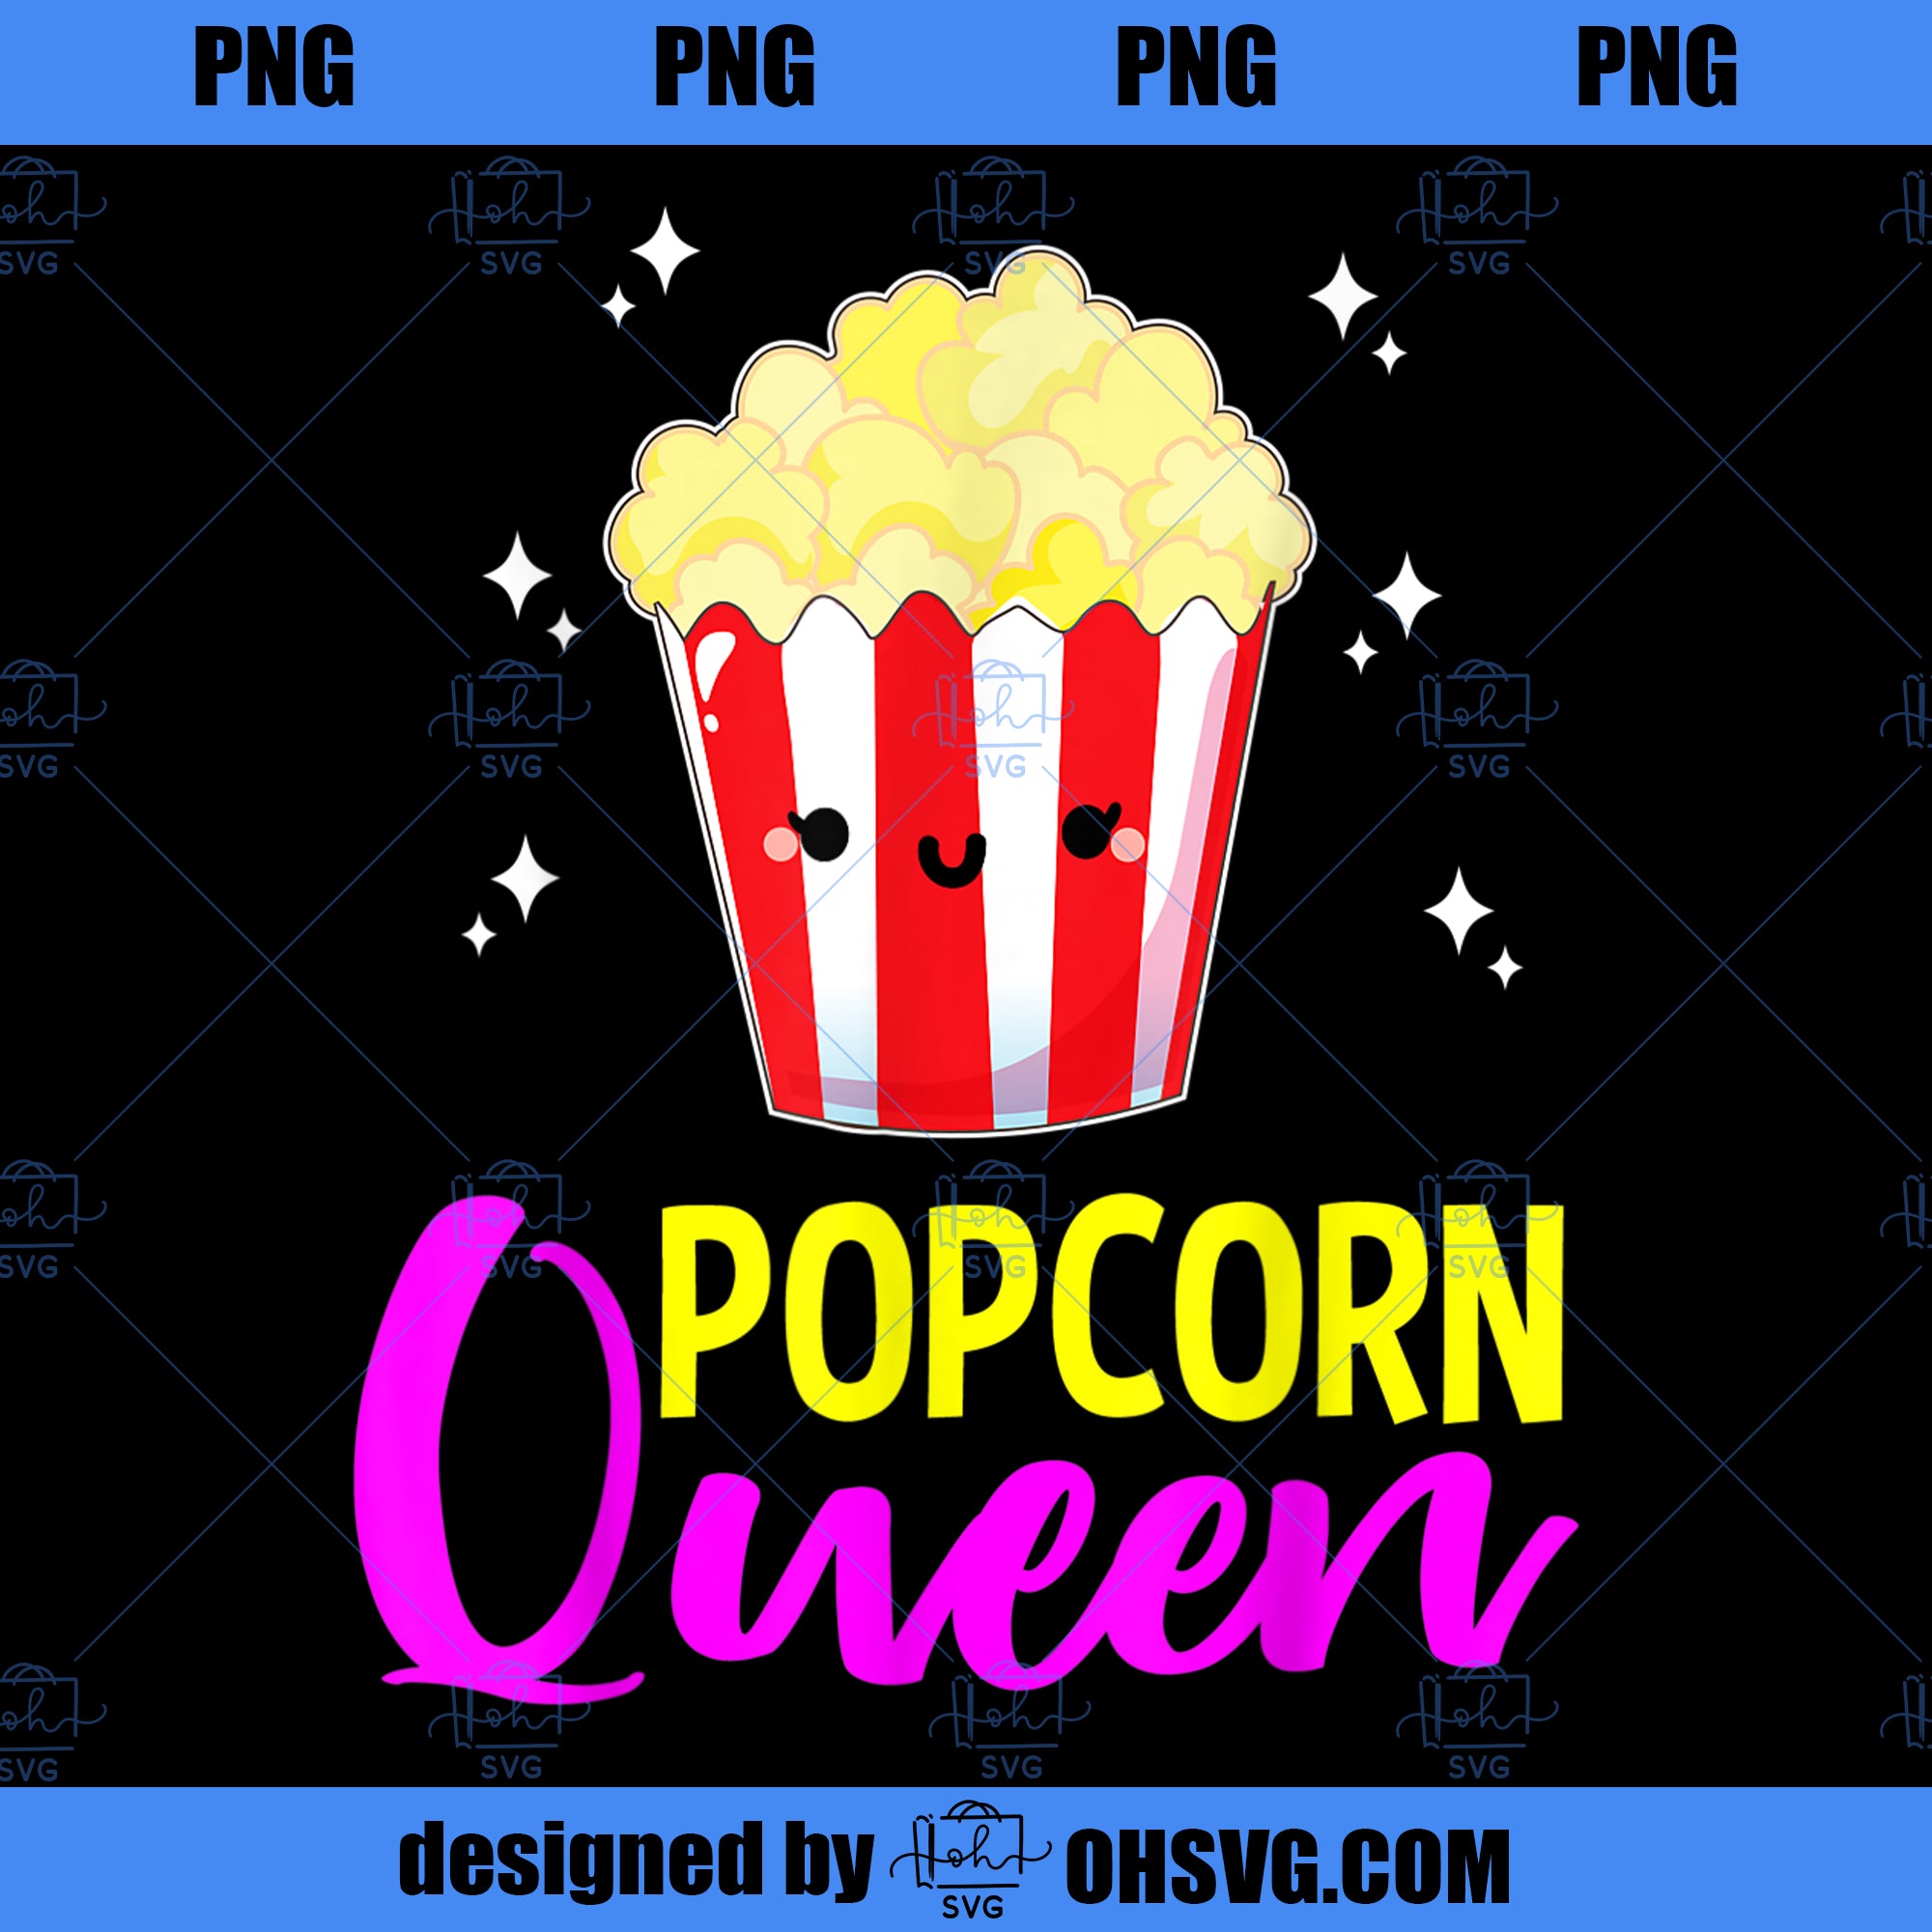 Popcorn Queen for Popcorn Lovers Movie Fans Film Students PNG, Movies PNG, Popcorn PNG